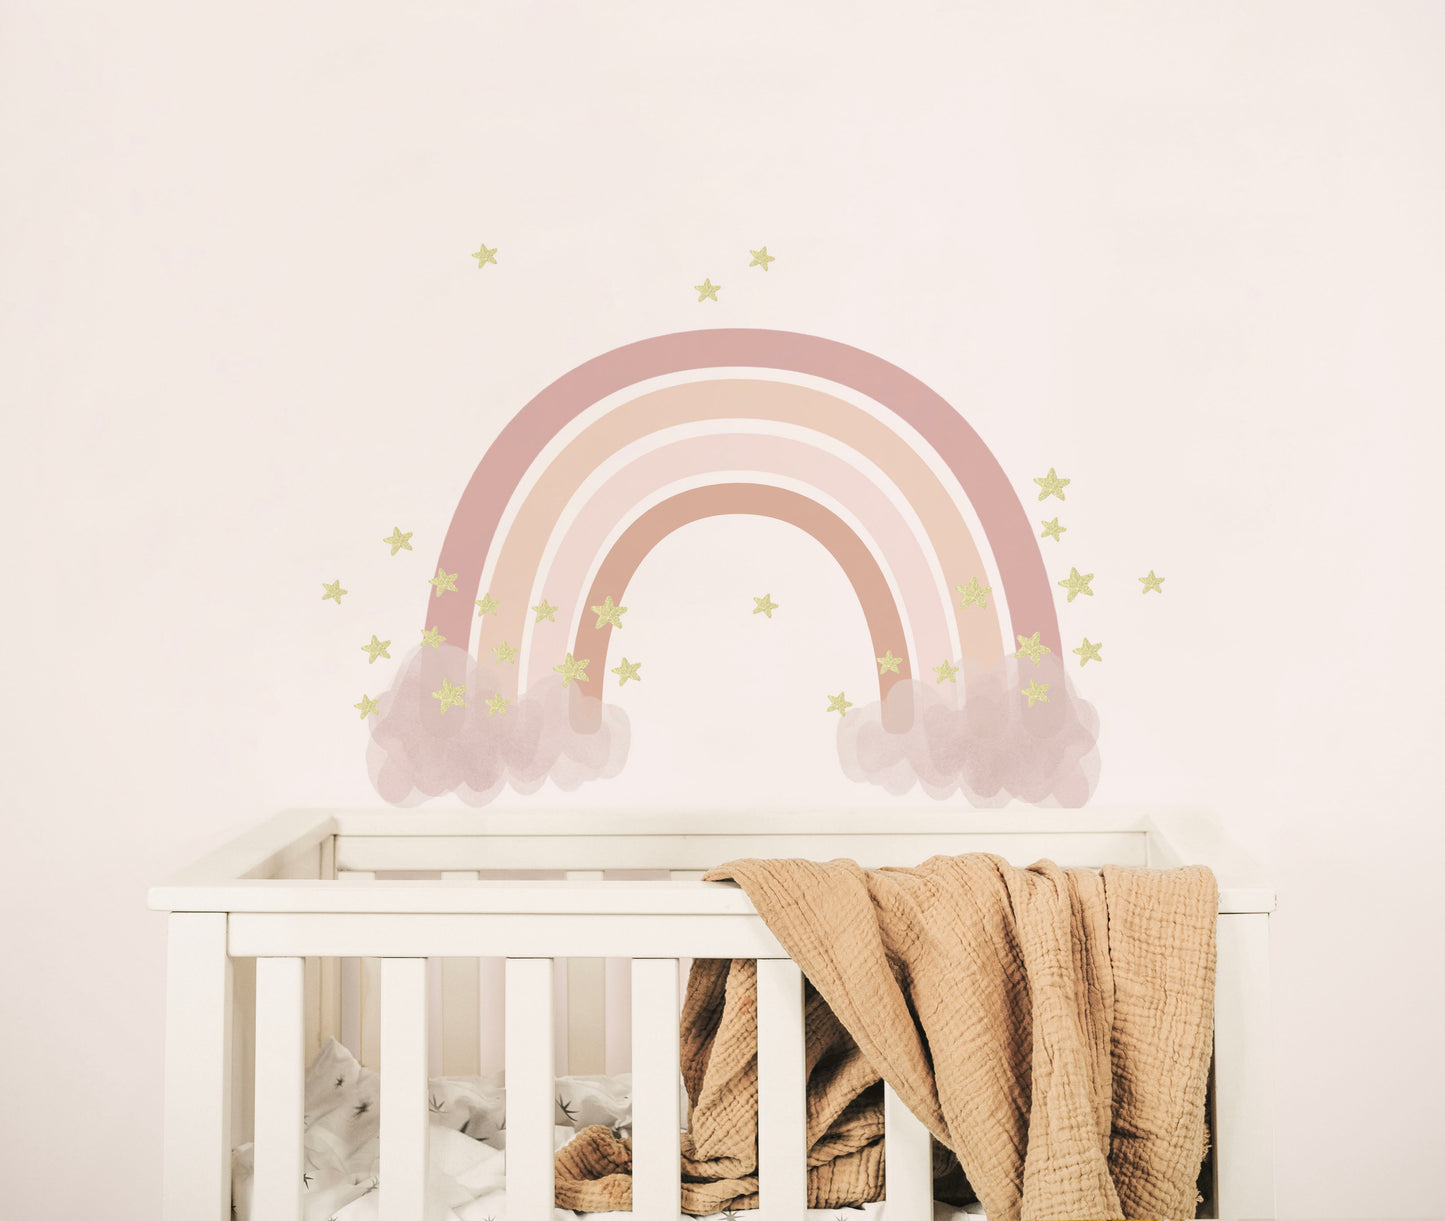 Magical Rainbow Wall Decal - Wall Decals - Fable and Fawn 